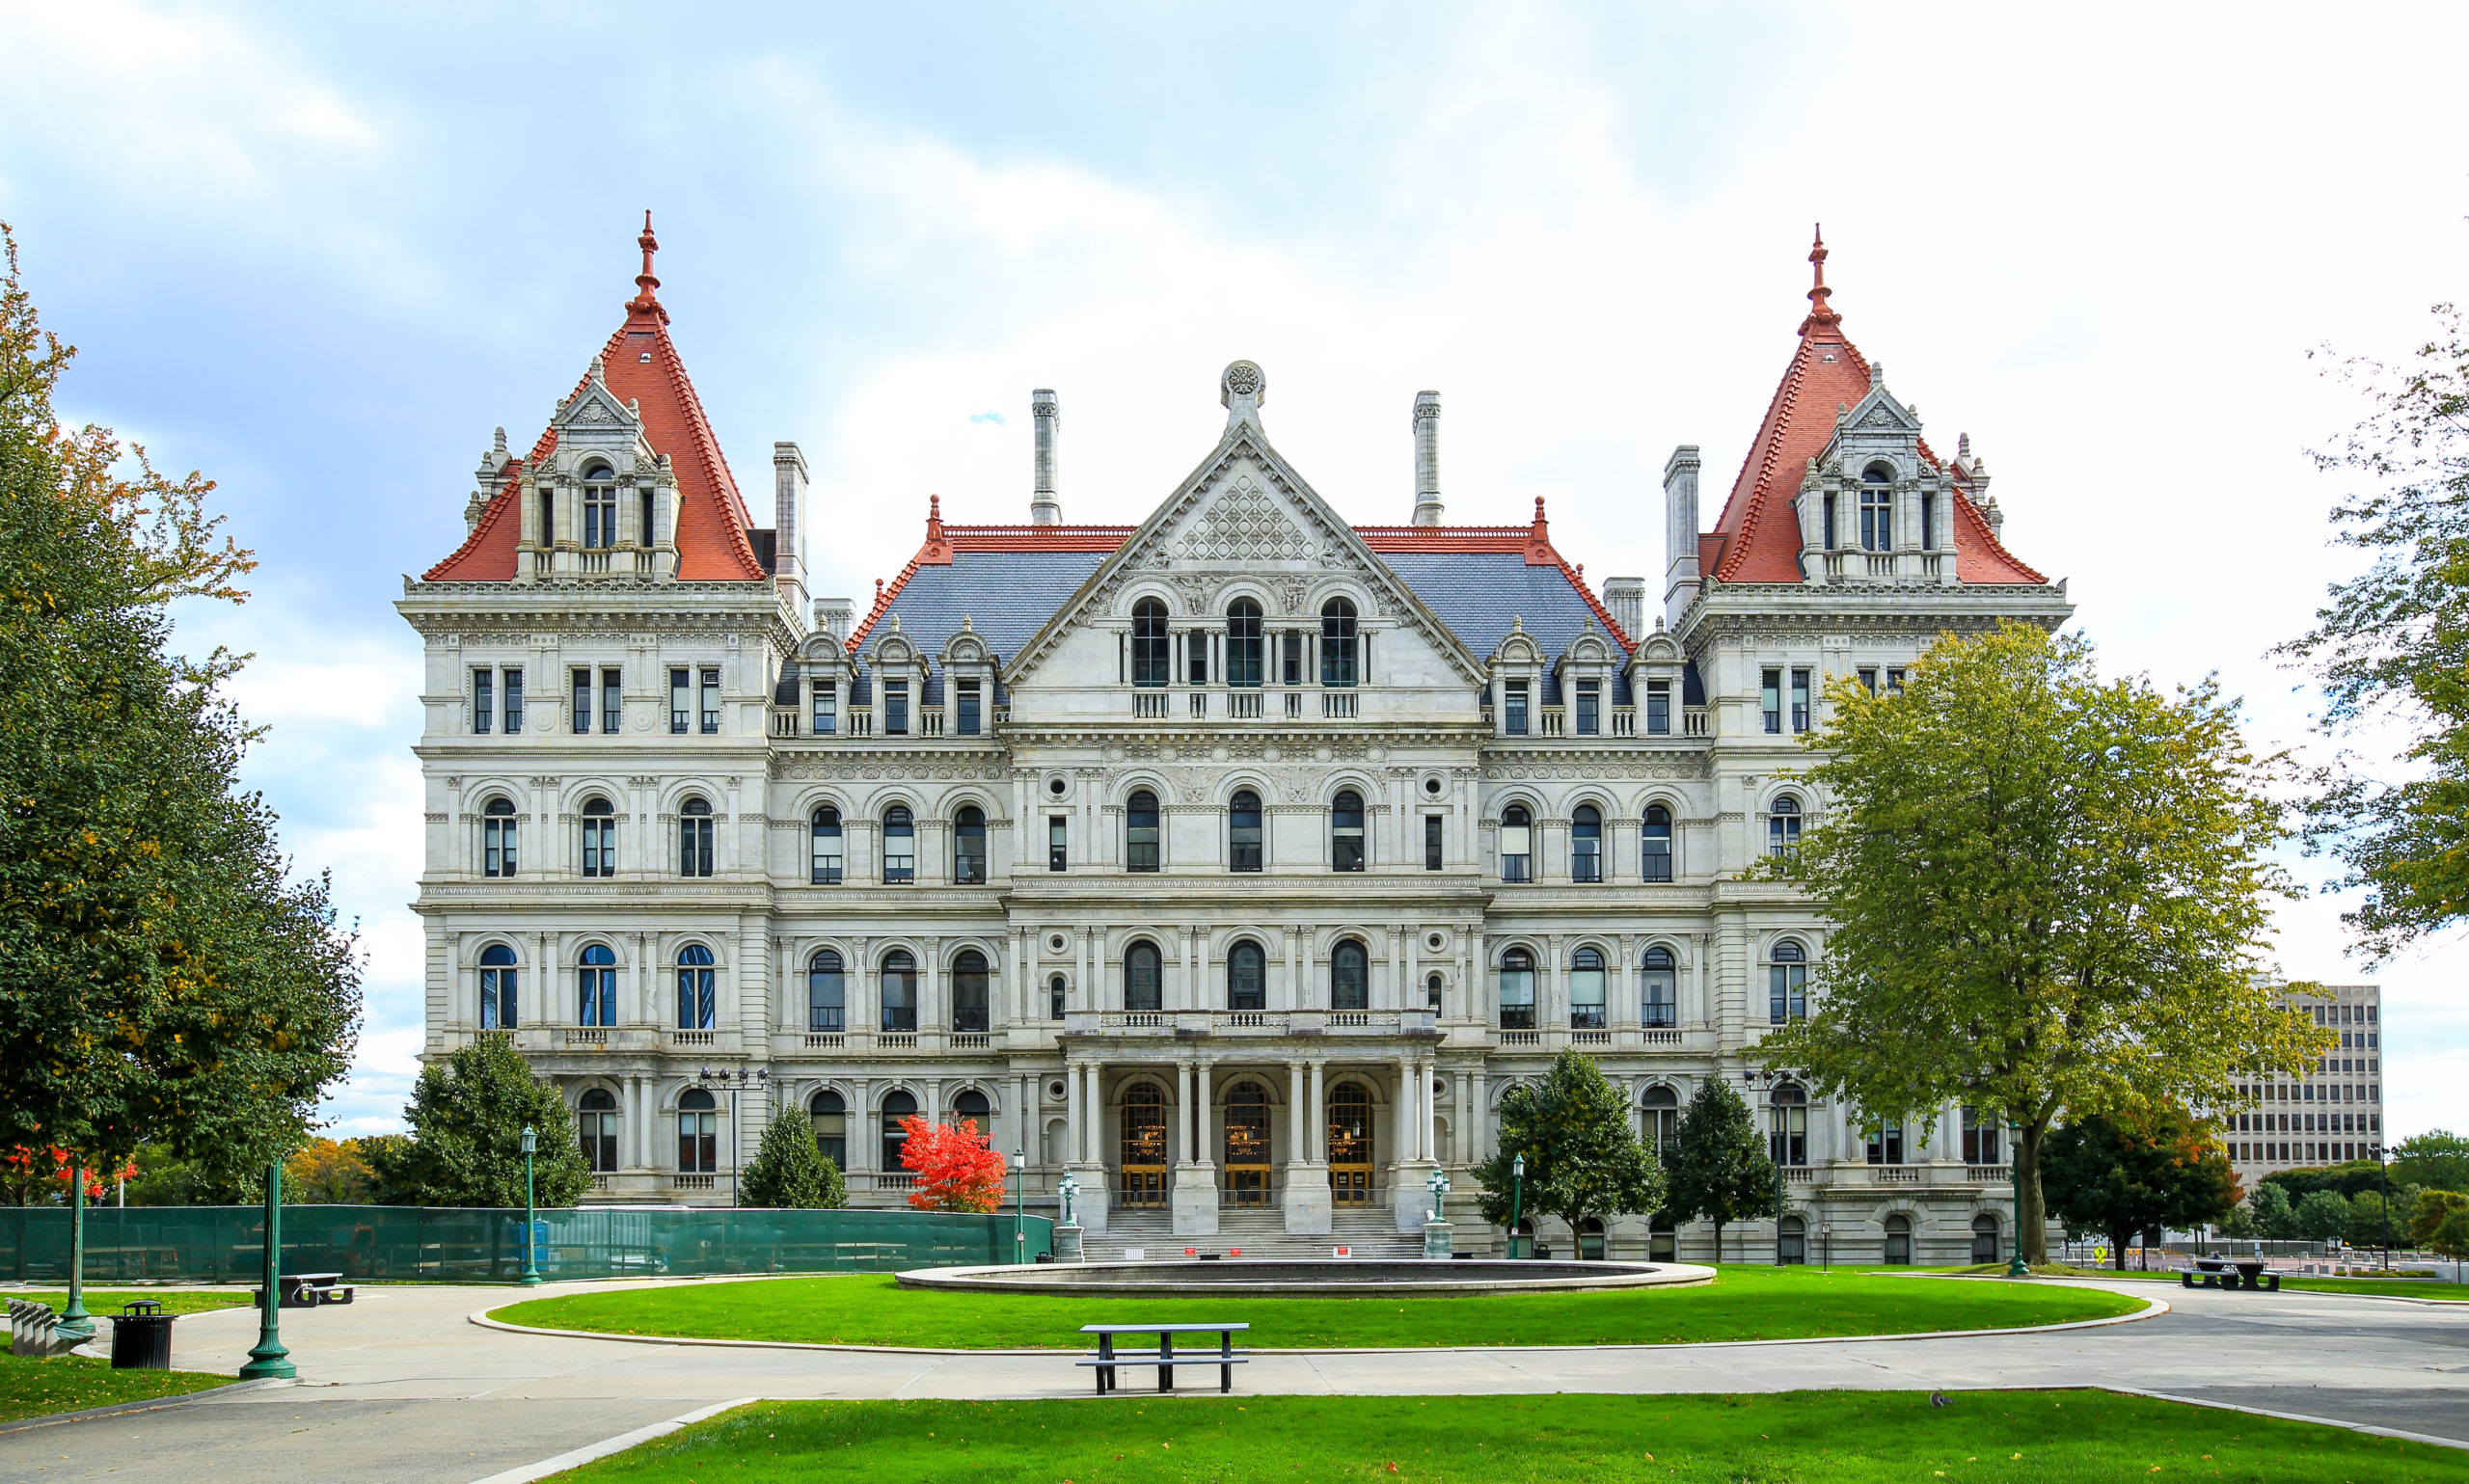 The New York State Capitol building and grounds in Albany, New York.